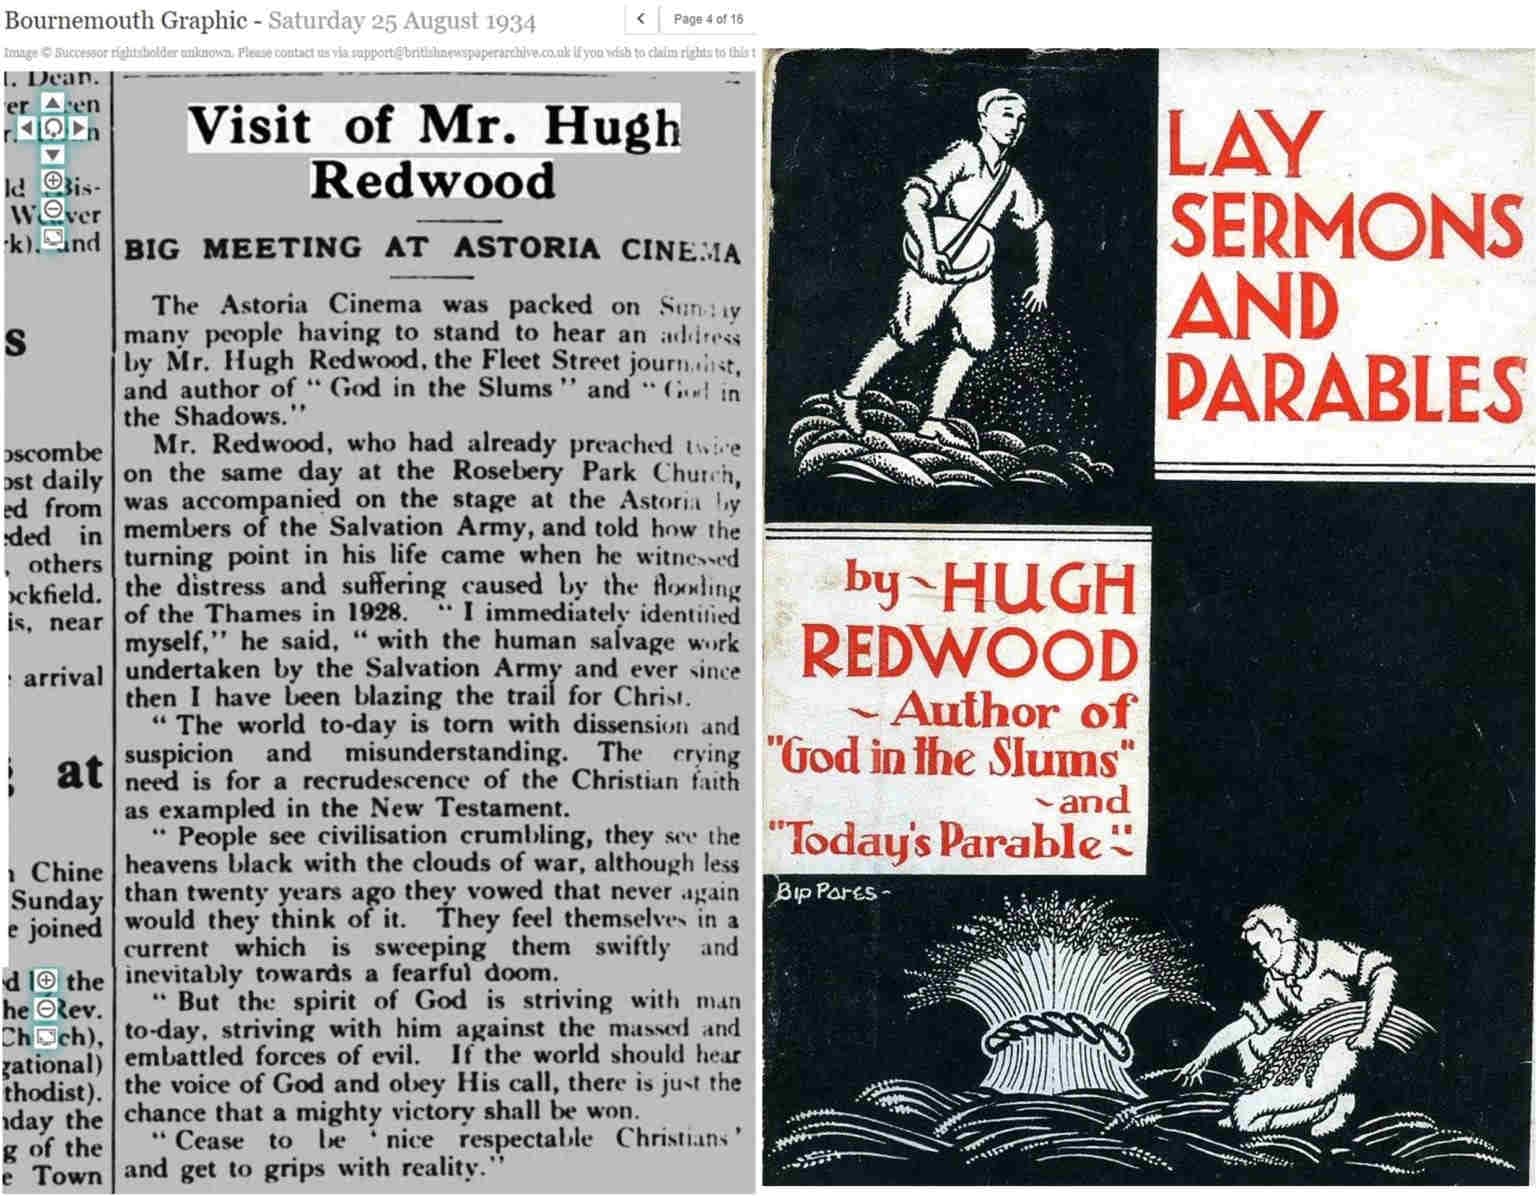 1934 Bournemouth Graphic newspaper article about a Mr redwood meeting at the Astoria Cinema. On the right is the image of a book cover. The title of it is Lay Sermons and Parables by Hugh Redwood, author of God in the Slums and Today's Parable.